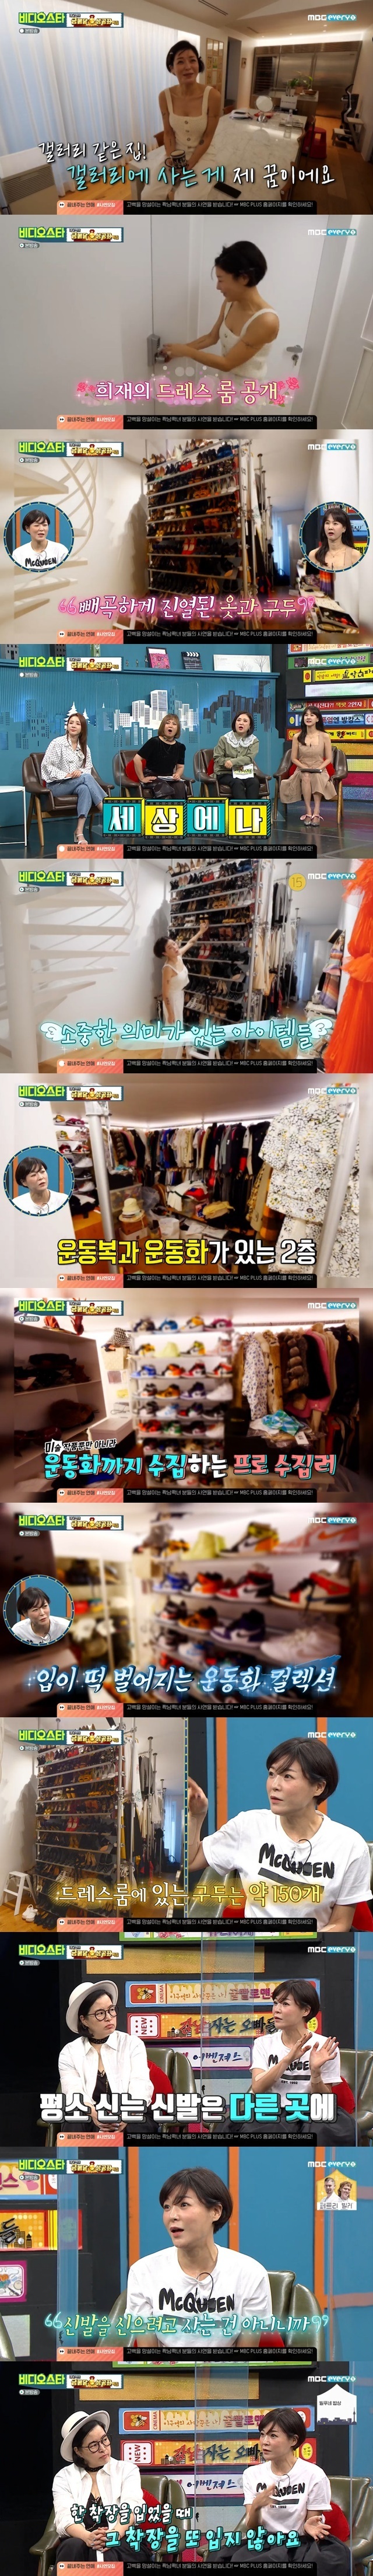 Kang hee-jae was surprised by the public offering, which is the second floor of the dressing room.On August 17, MBC Everlon Video Star, fashion CEO Kang hee-jae released his house.On the day of the broadcast, Sandara Park said, The house is said to be floating in a kanghee-jae related search word.It was rumored that the house was beautiful, he said, releasing the public image of the house taken by Kang hee-jae.In the public footage, kang hee-jae said, I walked to the entrance because it was a painting of Feelings that welcomed me when I opened the door.I also work out here and read books when it rains. He introduced paintings and lobby rooms decorated throughout the house.It is good to decorate the house like a gallery because I like works, said Kang hee-jae. If you put these works, the house looks much wider.The painting has perspective, so it feels far away from the wall. It was frustrating with the wall, but it is Feelings, which is a widening house because it is painted. Then, kang hee-jae said, I like interior too much.When people are hanging a picture, they set the center, and Im a little bit right from the center, making the walls look wider and breaking the rules, he said, a special tip.Here, kang hee-jae said, Sunset lighting. Feelings flying in a plane in the Corona era. GD and Jenny bought it.It is like an aurora in the night sky, he said. It is a dream to live in a gallery-like house and gallery.There are works everywhere. There are works in the bathroom. The dress room of the kang hee-jae, which was released after this, is the broadest room in the house on the second floor, and the admiration of it is not a store came out in the dress room of the kang hee-jae.Every shoe has memories. God had a lot of good things to do with me.In addition to revealing the shoes with special memories, It is good to imagine that it is fun every time I see it when I go to Rome.I like to think about putting out my clothes when I am good. On the second floor, there are sportswear, sneakers, and ski clothes.I have not been able to organize it yet, but I want to boast about it. He also released a huge sneaker collection, and this time he was responded to as logistics warehouse. When asked how many shoes there are, Kang hee-jae said, I rarely wear about 150. I like sneakers.In general, the shoes are in the lobby room. The shoe collection in the second floor dressing room was repeatedly surprised to find that it is not well worn.Kim Sook was surprised that shoes take three years to wear once a thousand, and kan hee-jae said, I do not live to wear shoes.It is good to see healing and beautiful shoes as boxes. Same Maximumist Sandara Park said, I can not sell it after time, so I can not get it after now.